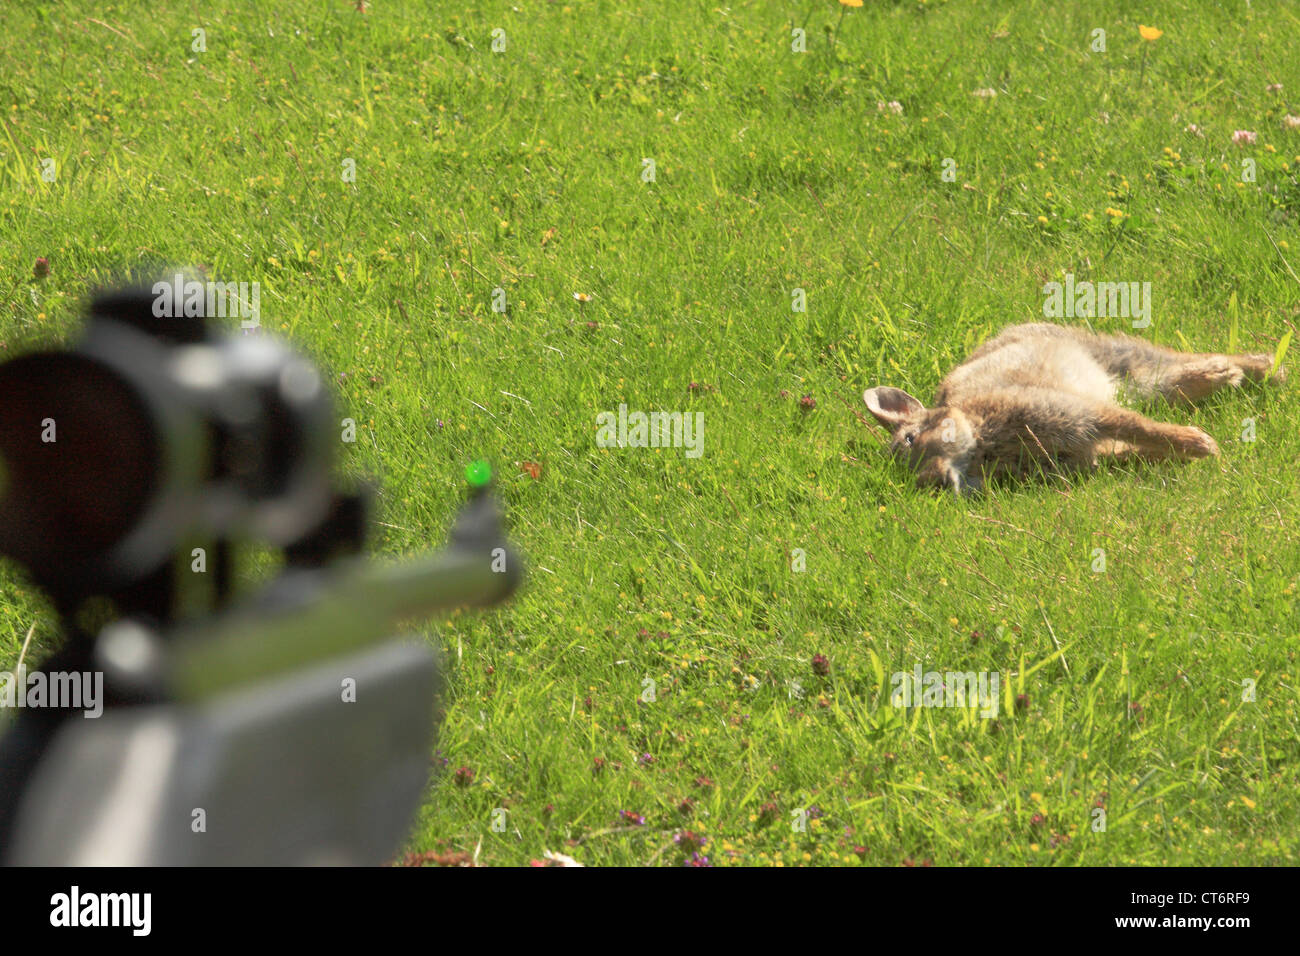 An air rifle aiming at a wild dead rabbit which had just been shot through an open window Stock Photo